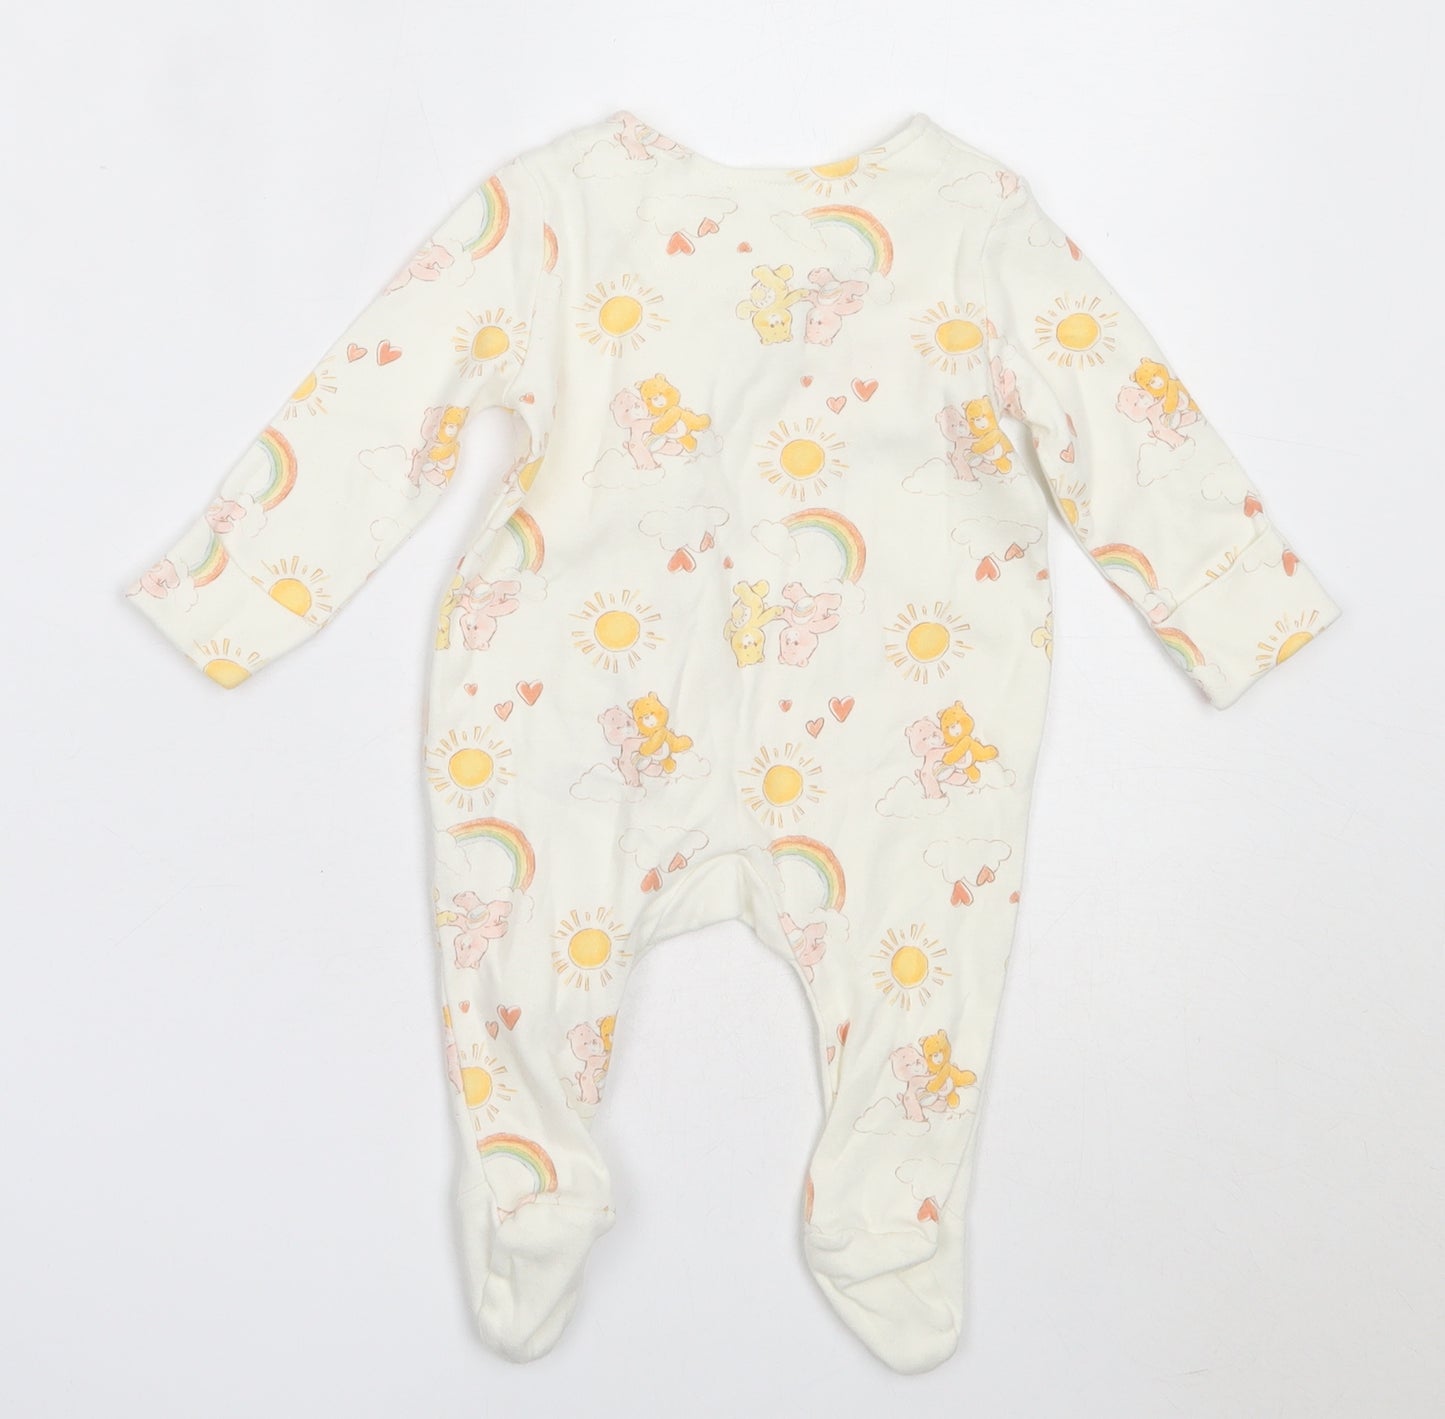 George Girls Ivory  Cotton Babygrow One-Piece Size 0-3 Months   - Care Bears